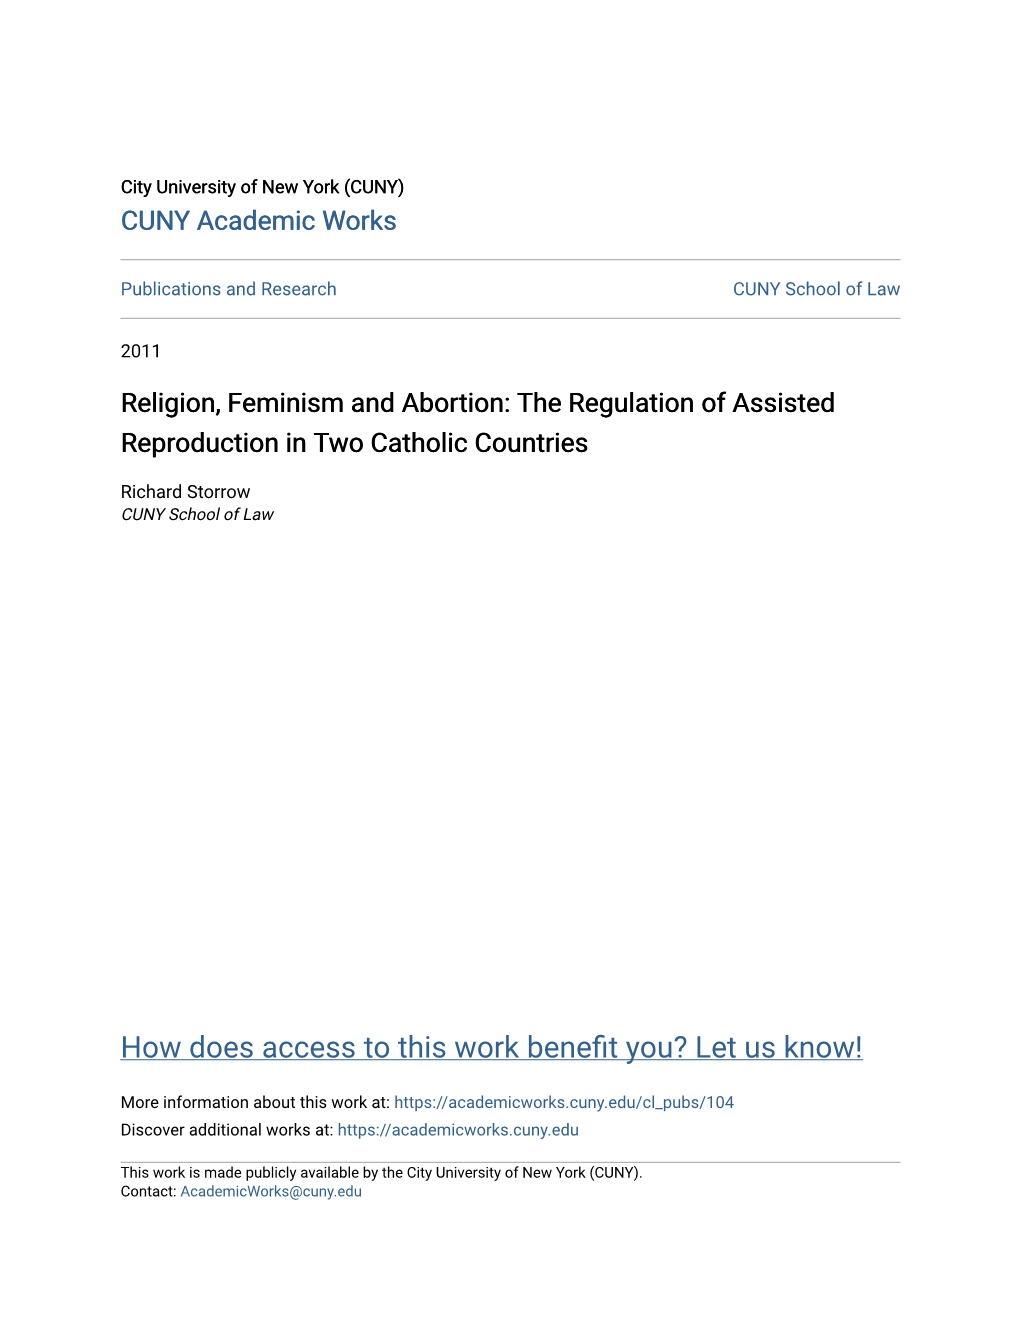 Religion, Feminism and Abortion: the Regulation of Assisted Reproduction in Two Catholic Countries